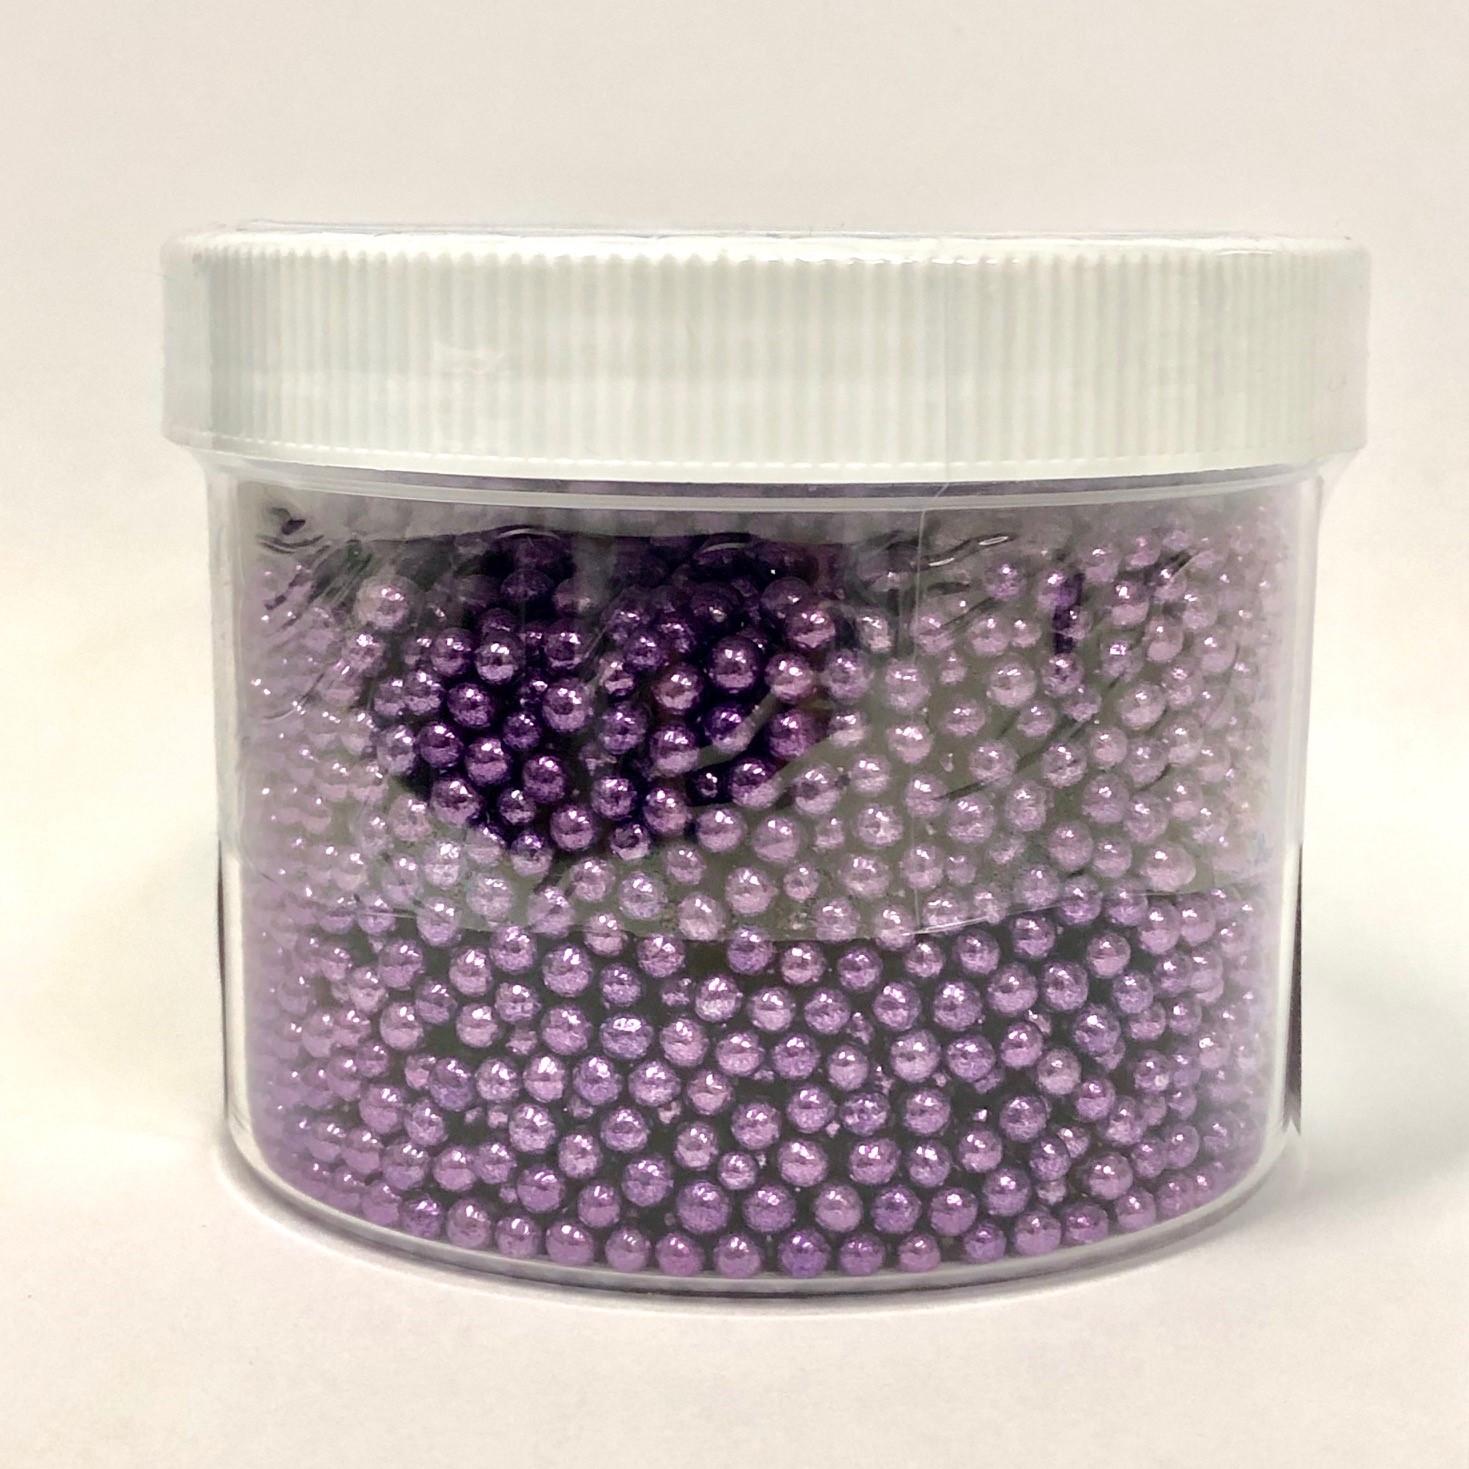 Dragee Metallic Purple 4mm - 250g by Confectioners Choice